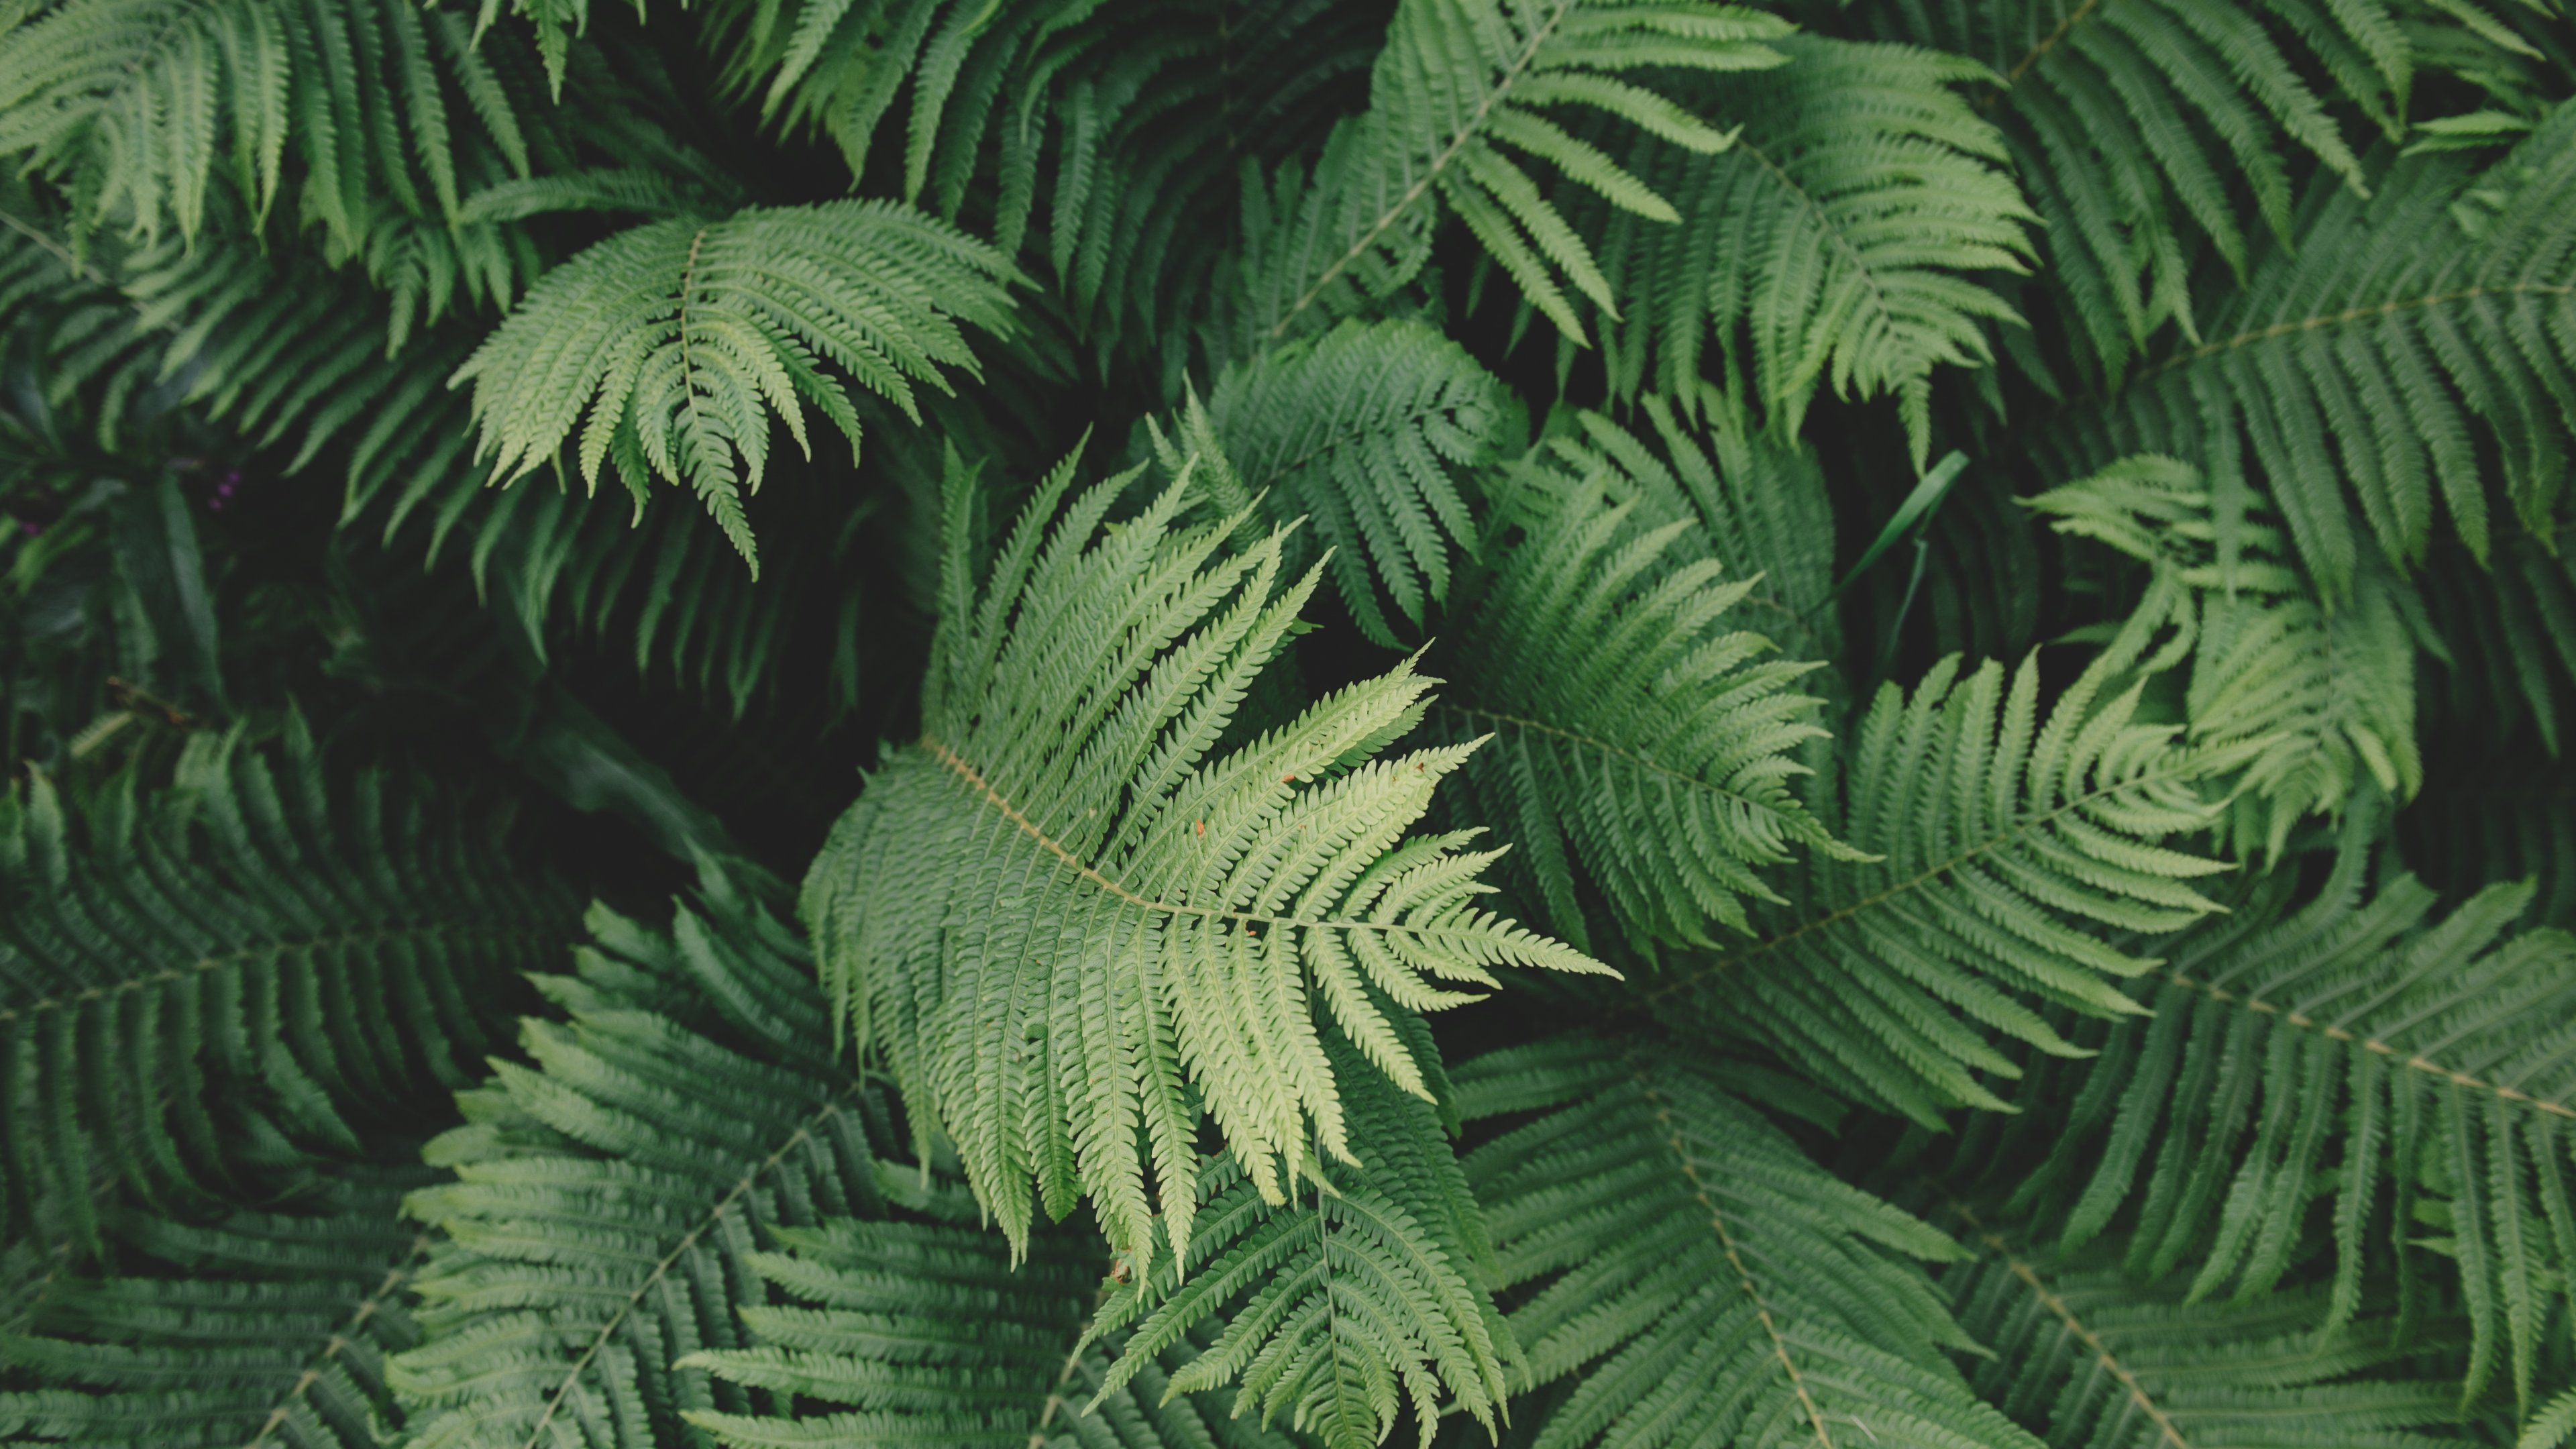 Aesthetic Grid Plants Wallpapers